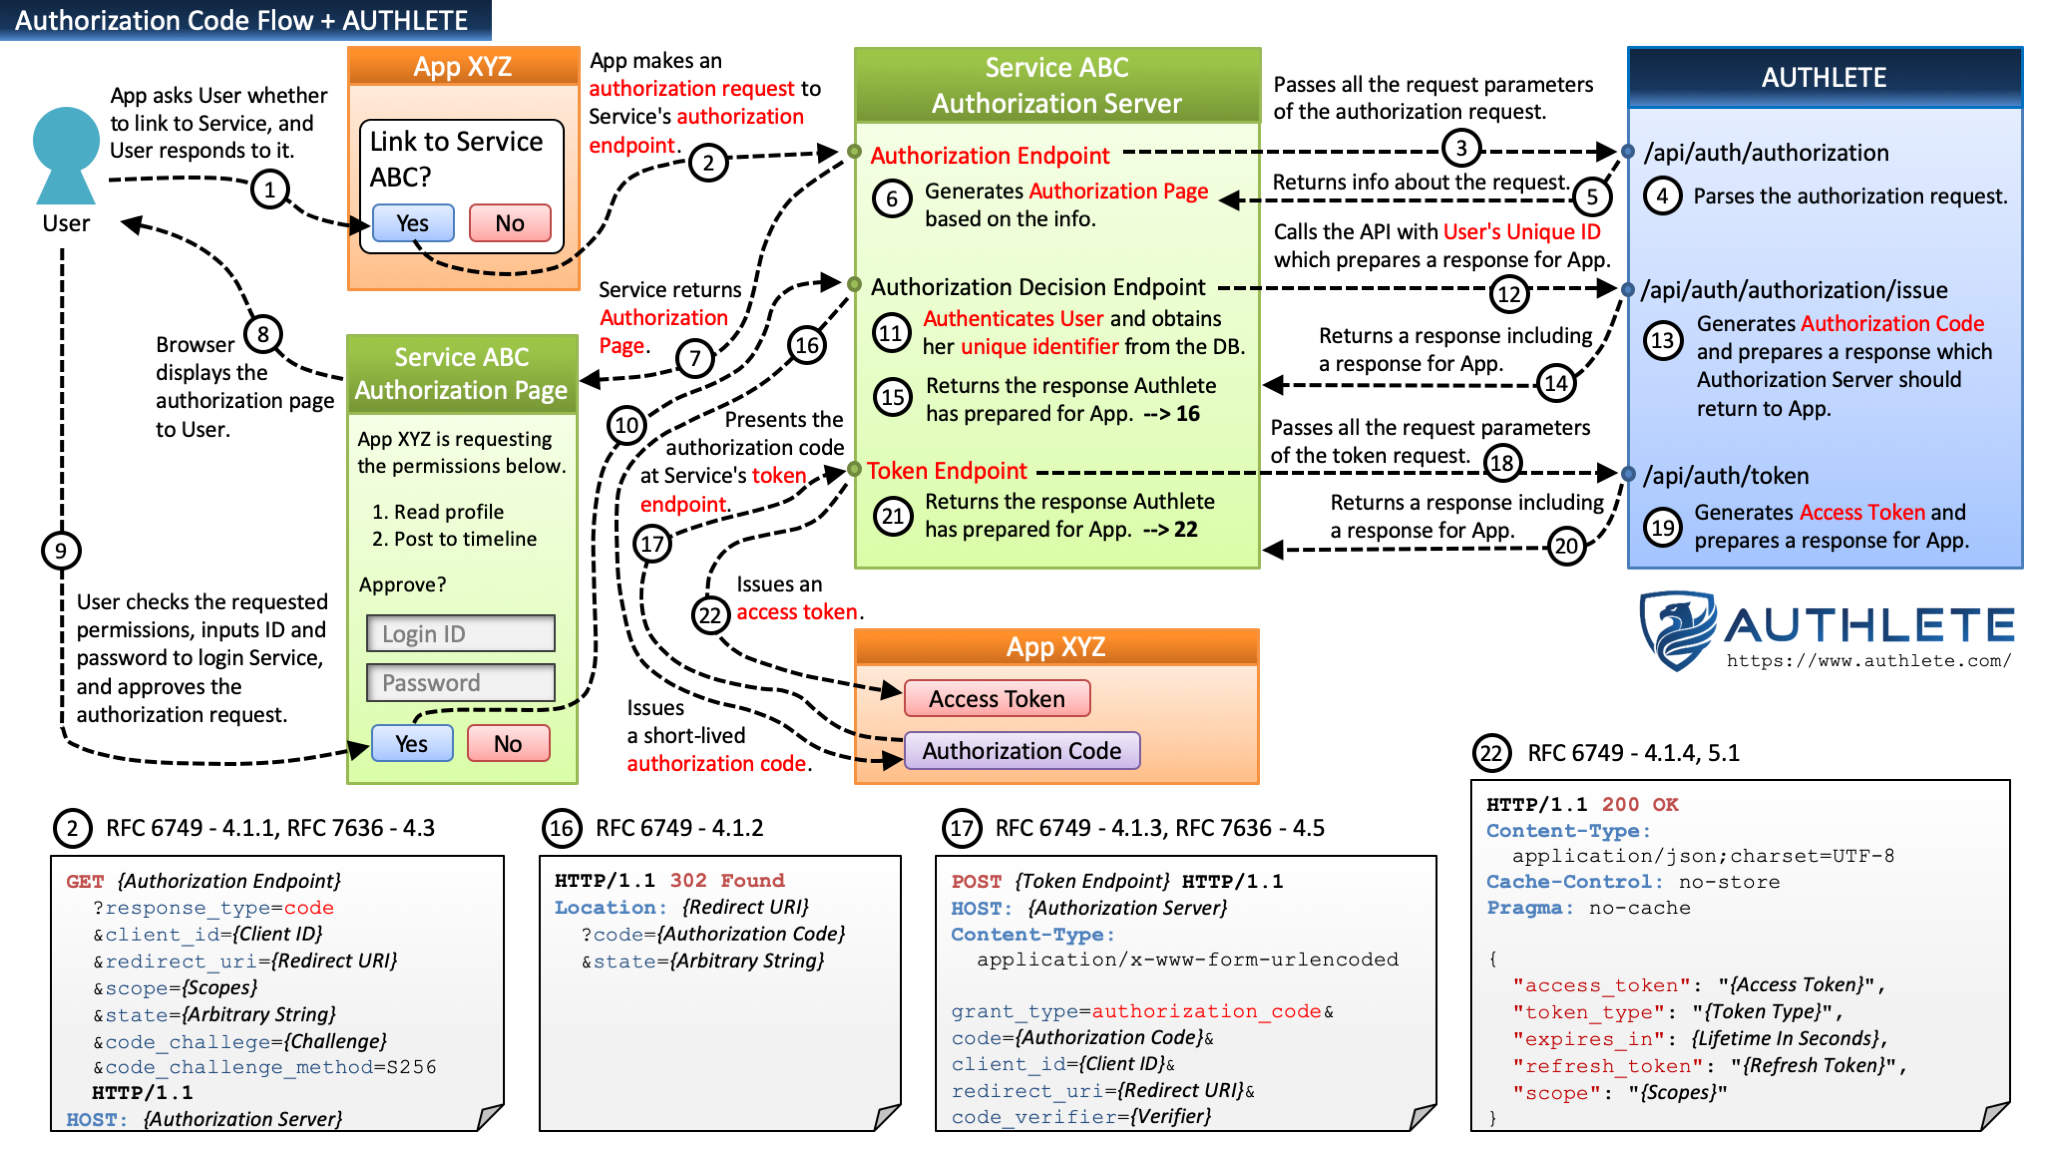 OAuth-Flows+Authlete-in-English_2_Authorization-Code-Flow.png